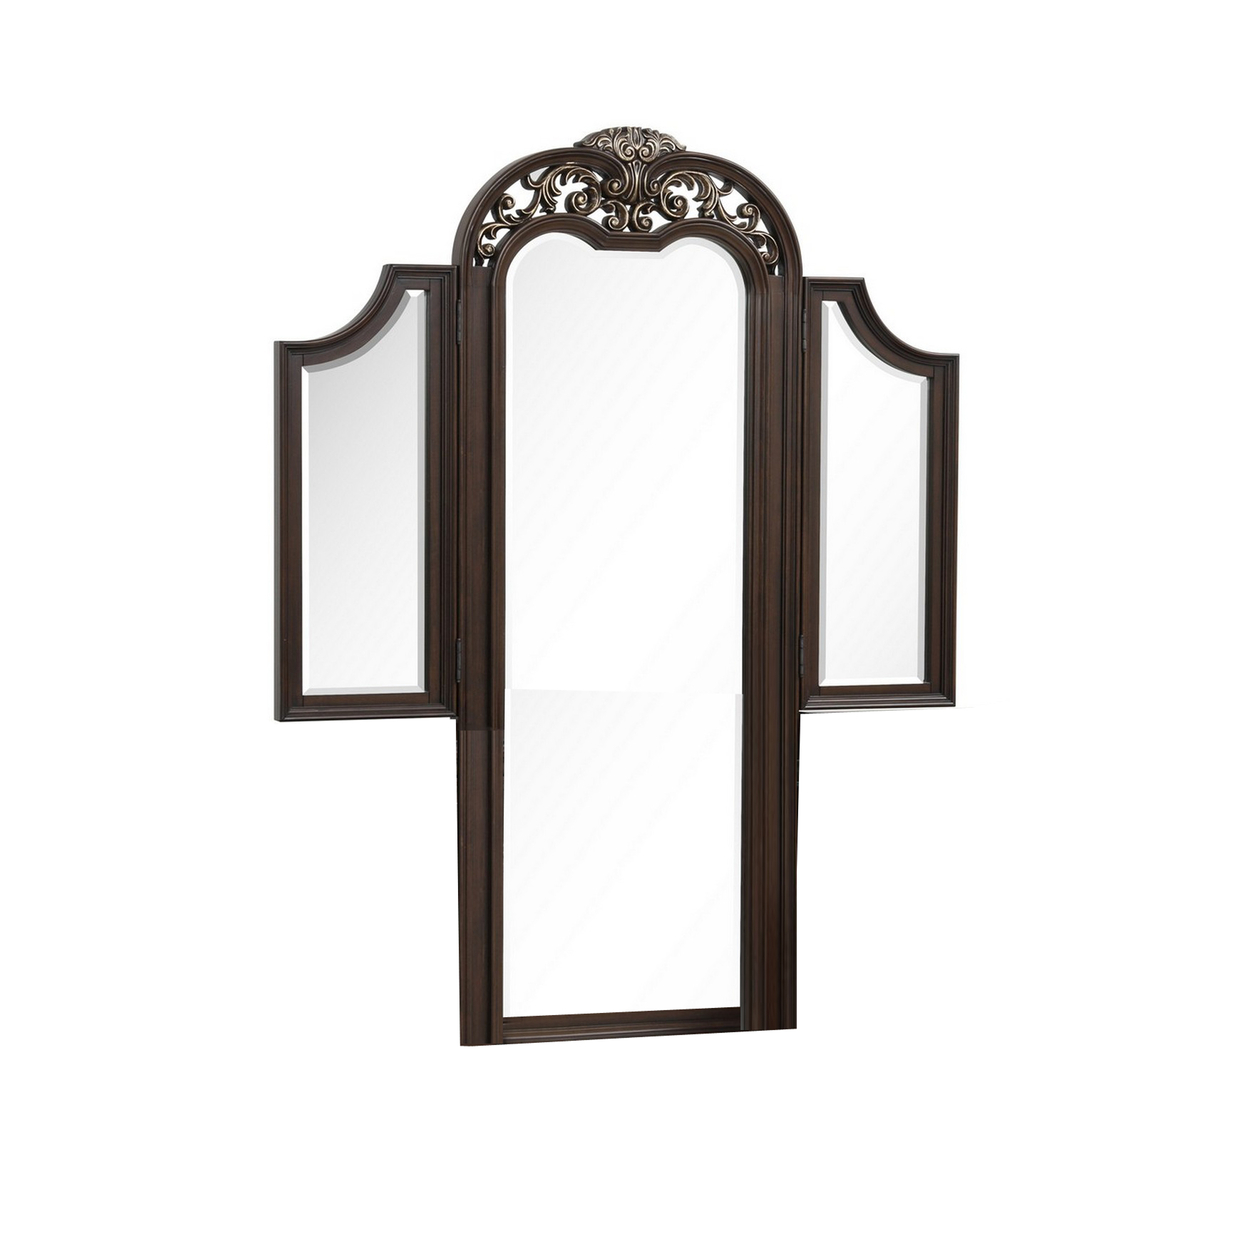 Liana 64 Inch Vanity Table Mirror, 3 Panels, Crown Carvings And Scrollwork -Saltoro Sherpi